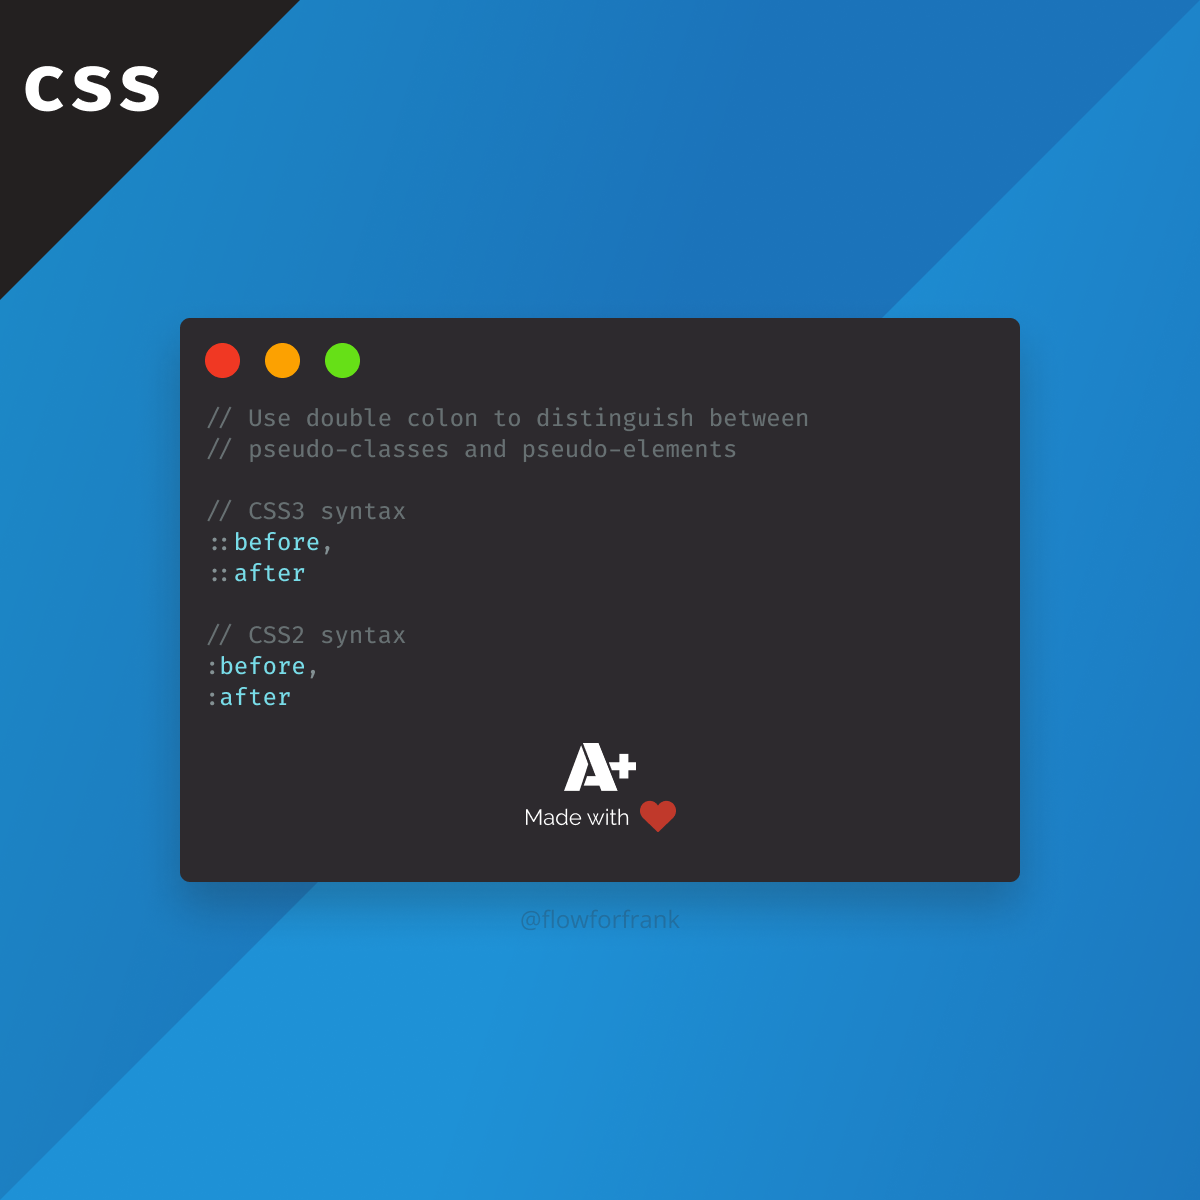 What is the Difference Between Single and Double Colon in CSS?